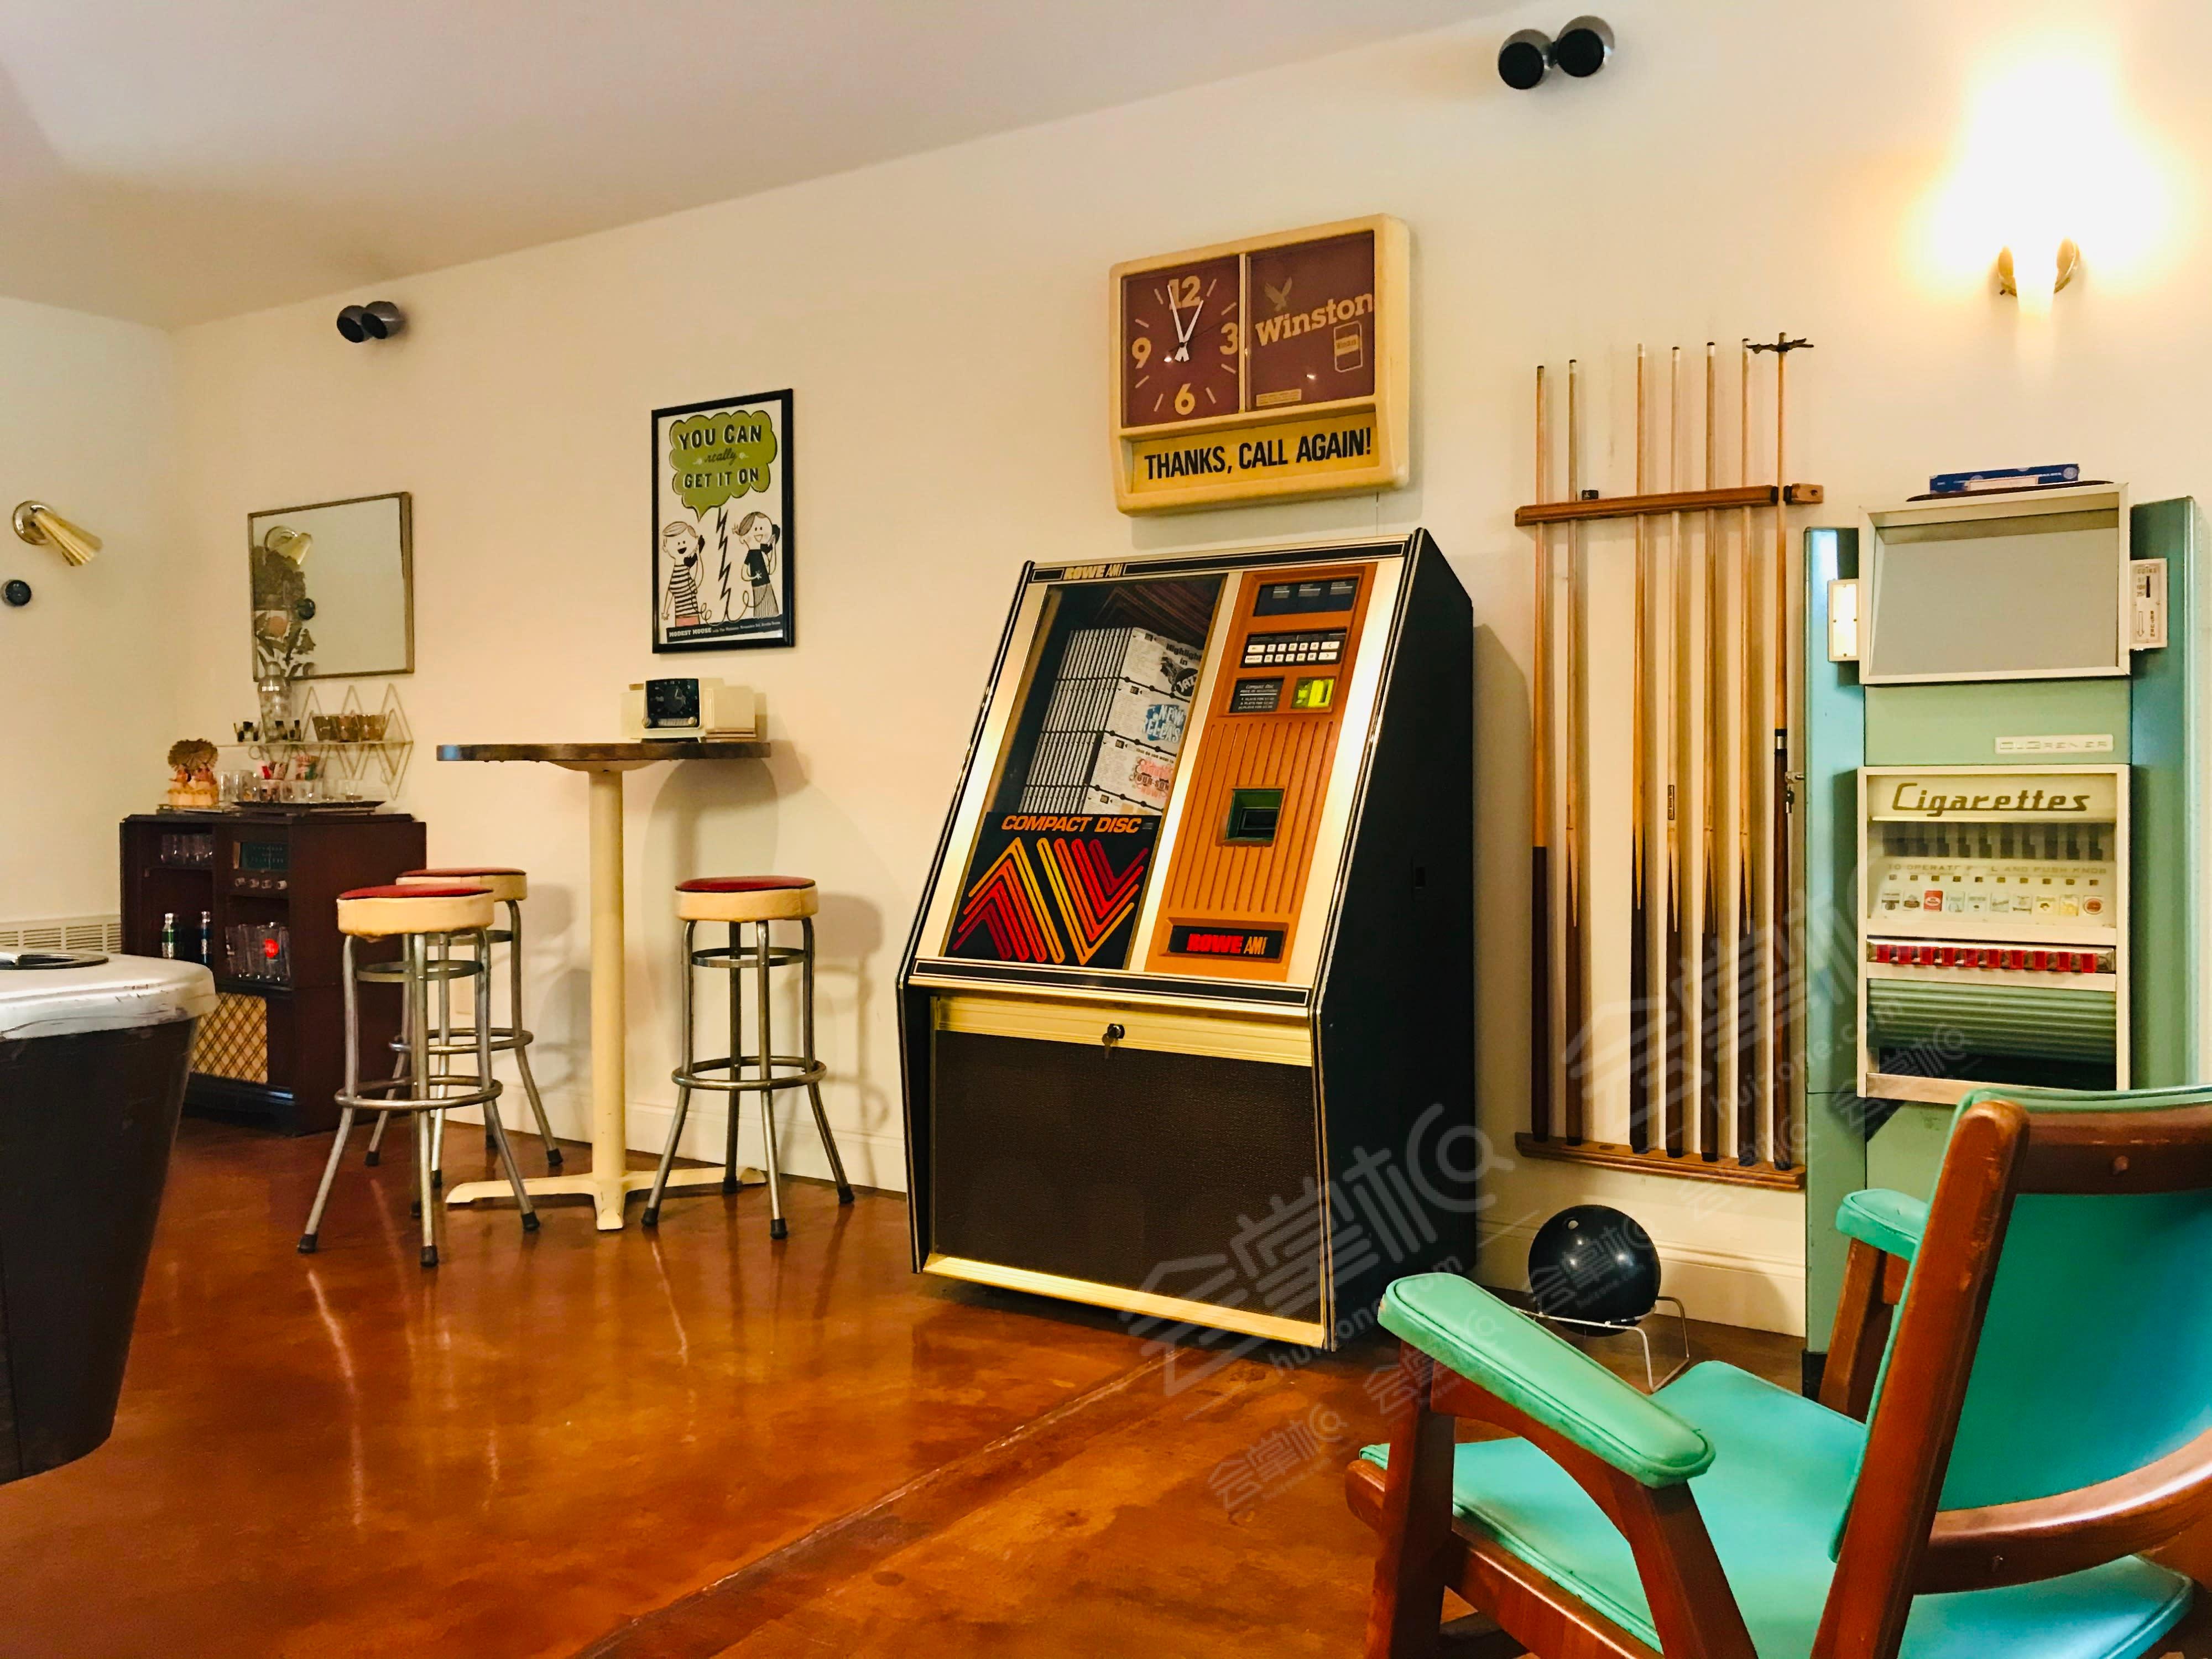 Funky Retro Gameroom with Swimming Pool, Pergola and Backyard Vintage Trailer in a Country Setting